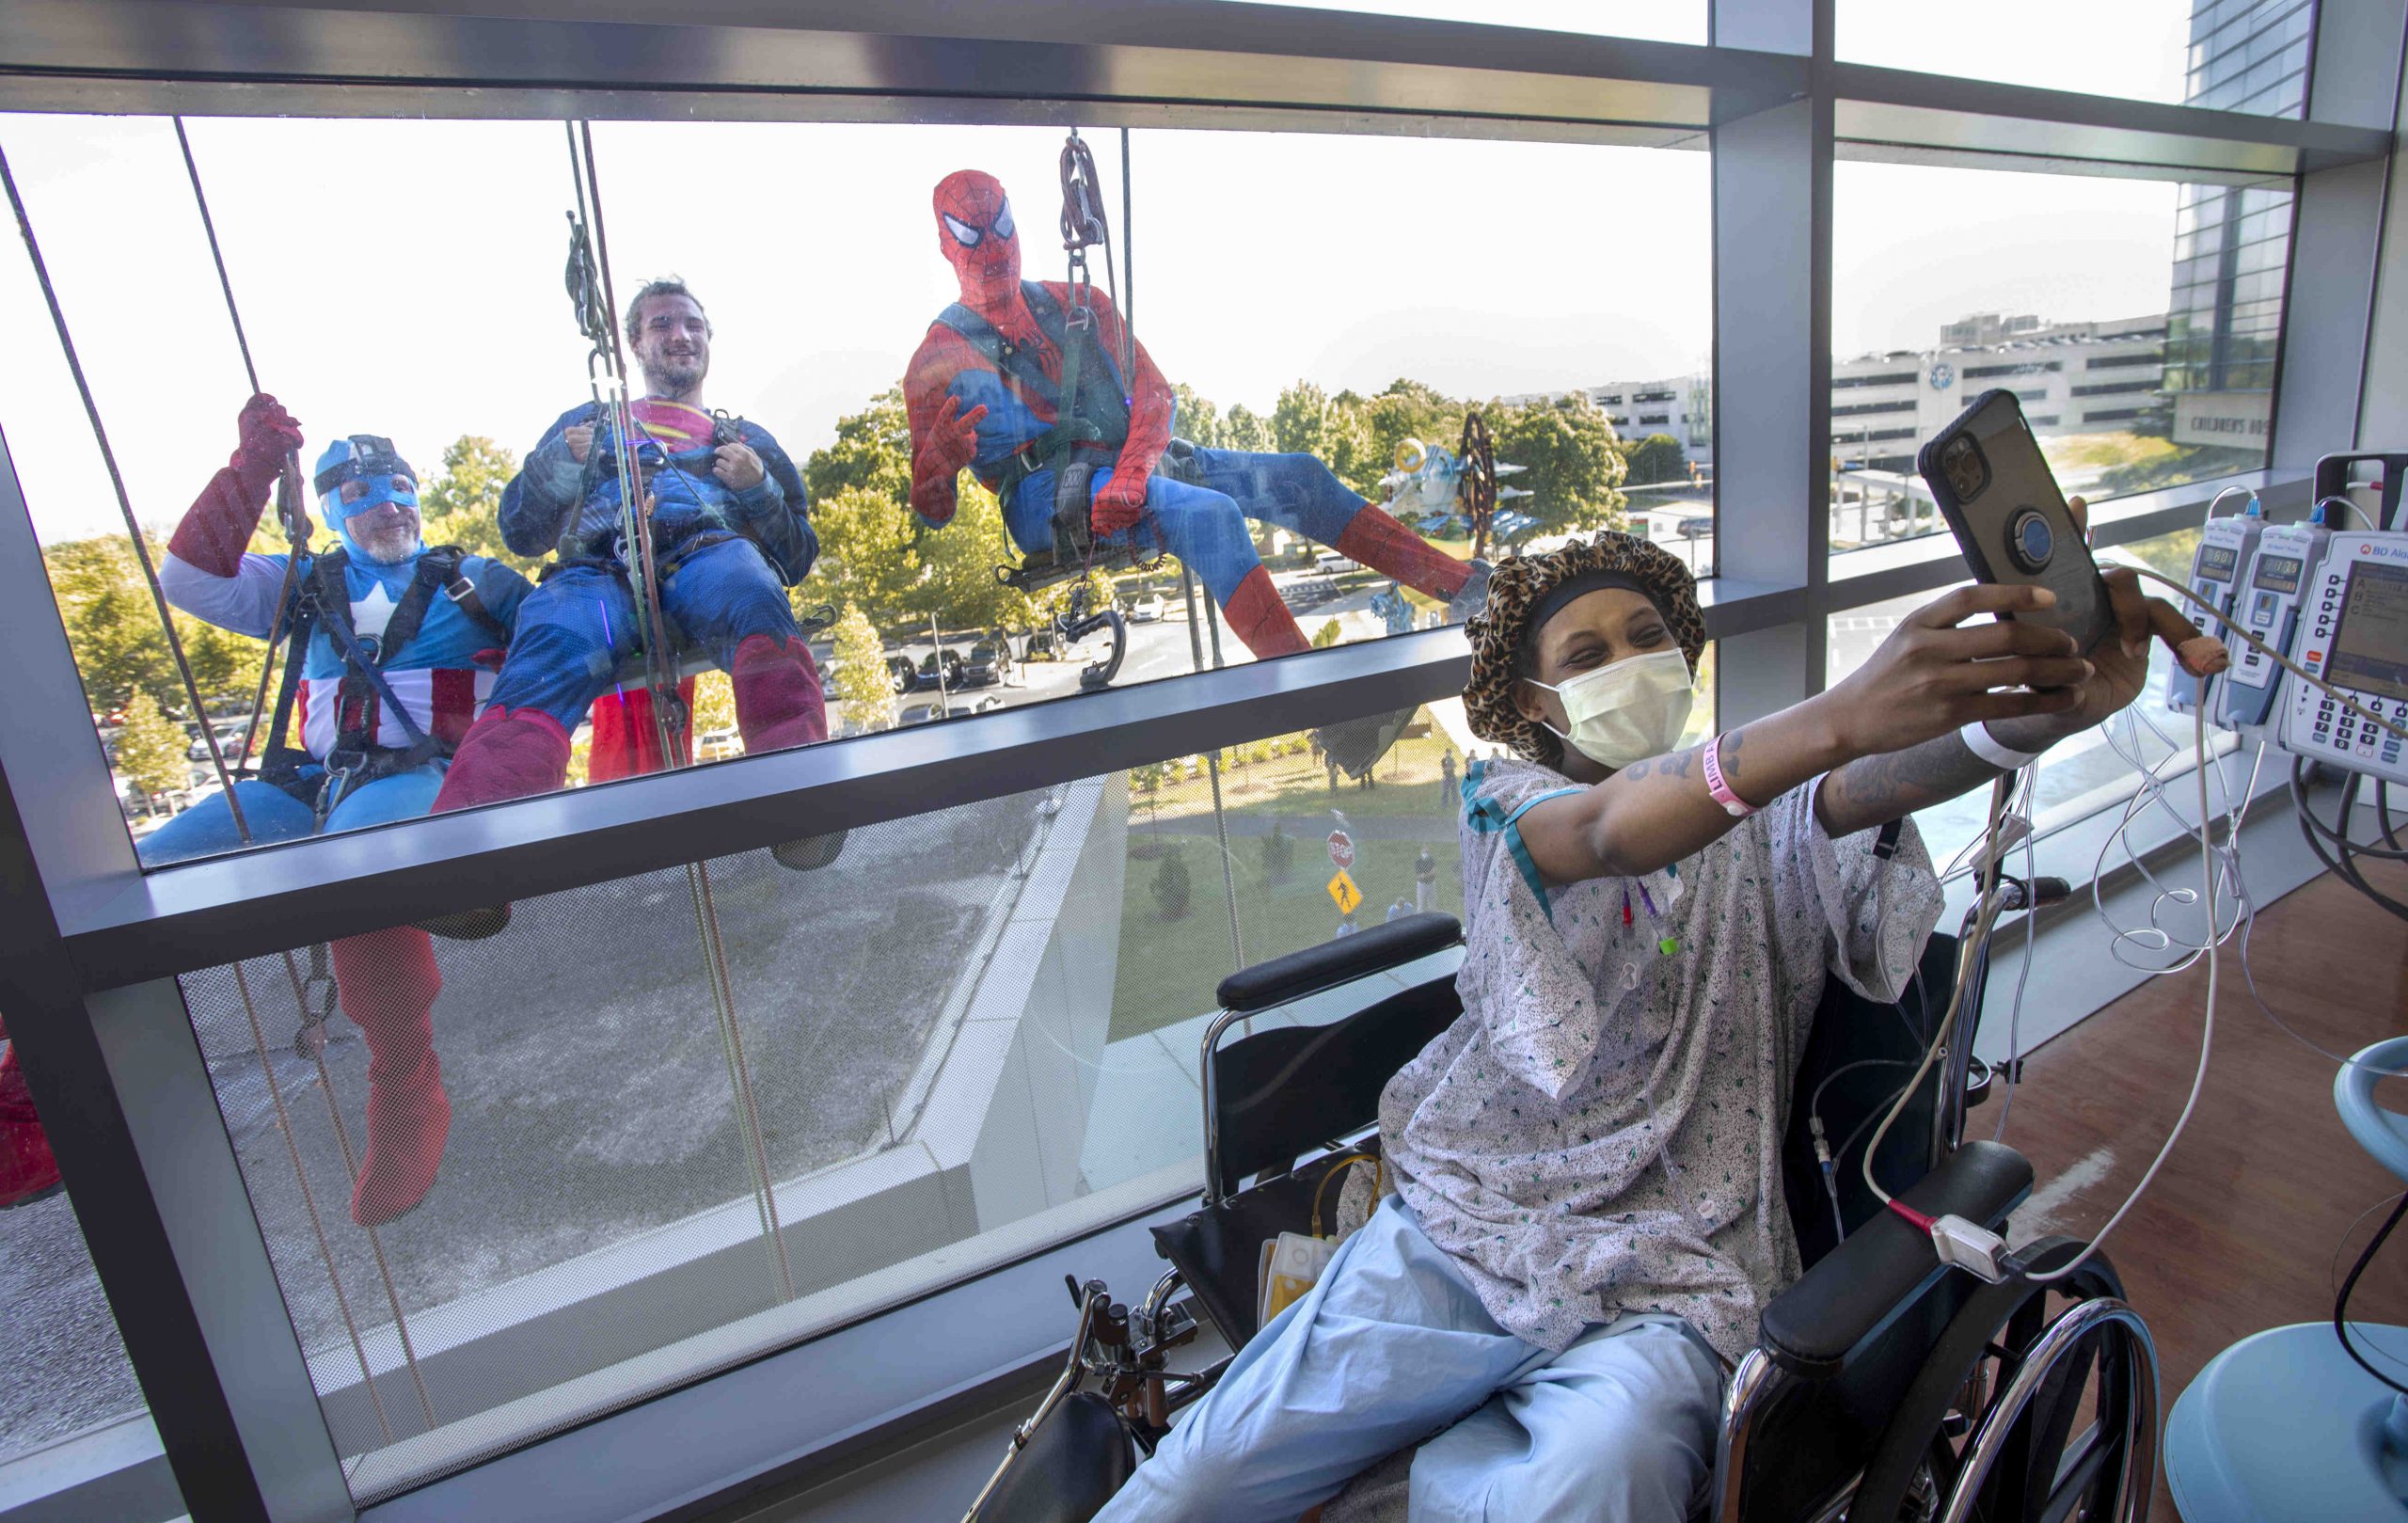 A woman in a hospital gown, cap and mask takes a selfie as three people in superhero costumes pose behind her, on the other side of a window.